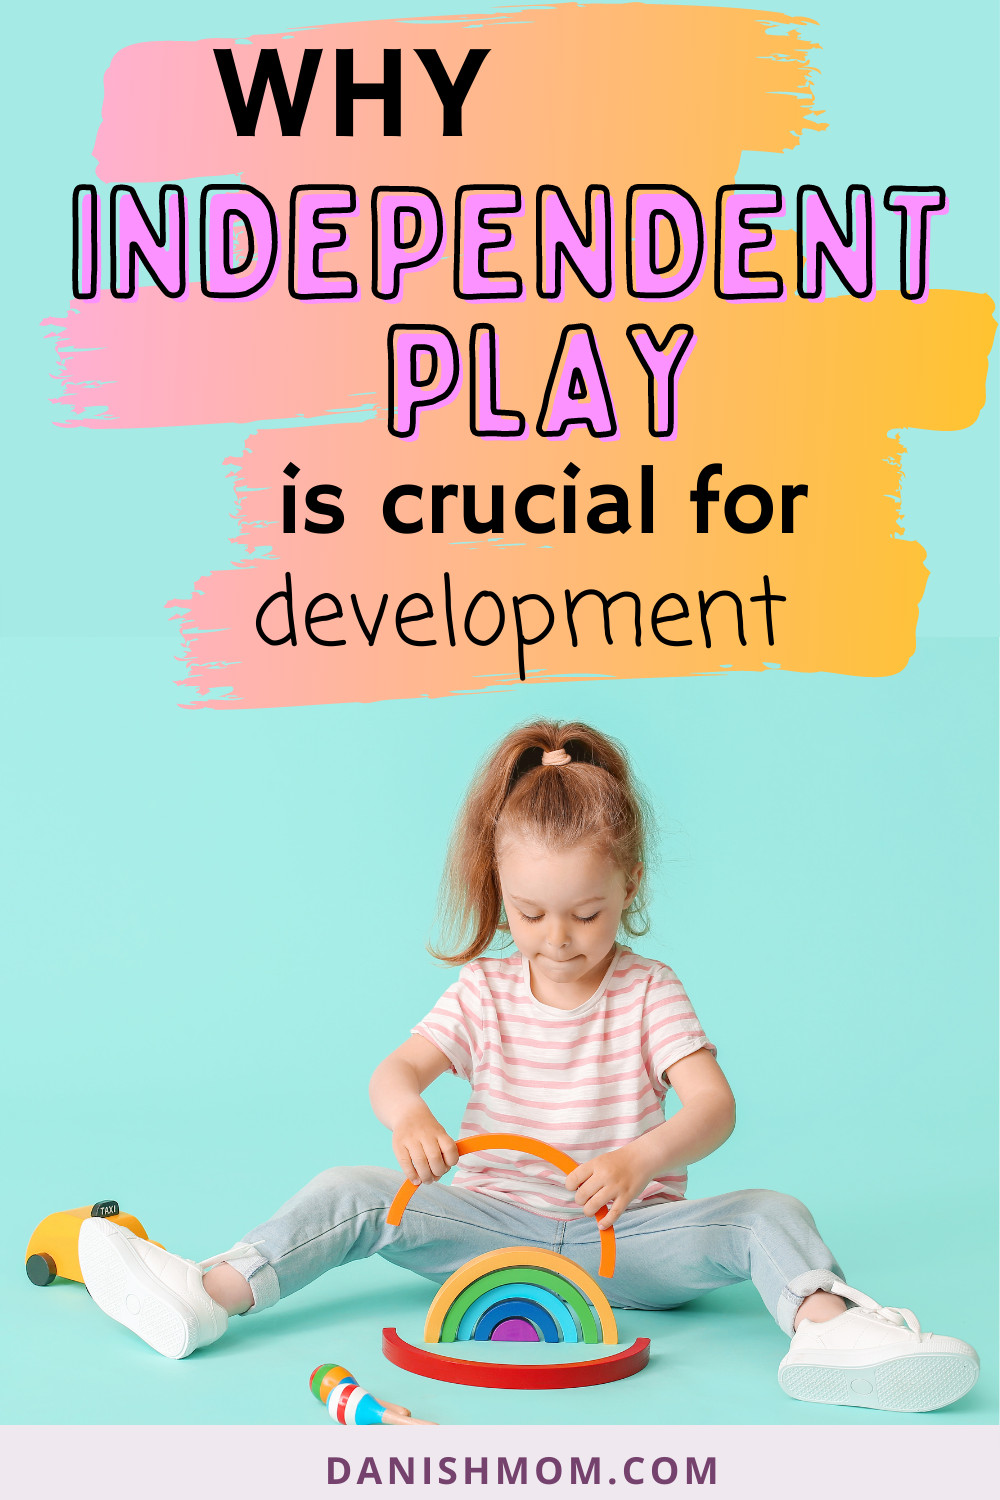 Discover the best possible ways to encourage independent play for toddlers and babies. Learn how it makes your child more independent, self-reliant and creative. Independent play | positive parenting | Nordic parenting | playtime | free play | unstructured play | parenting tips | let go of mom guilt | parenting advice | Danish parenting | mom hacks | playtime | toddler play | baby play #positiveparenting #nordicparenting